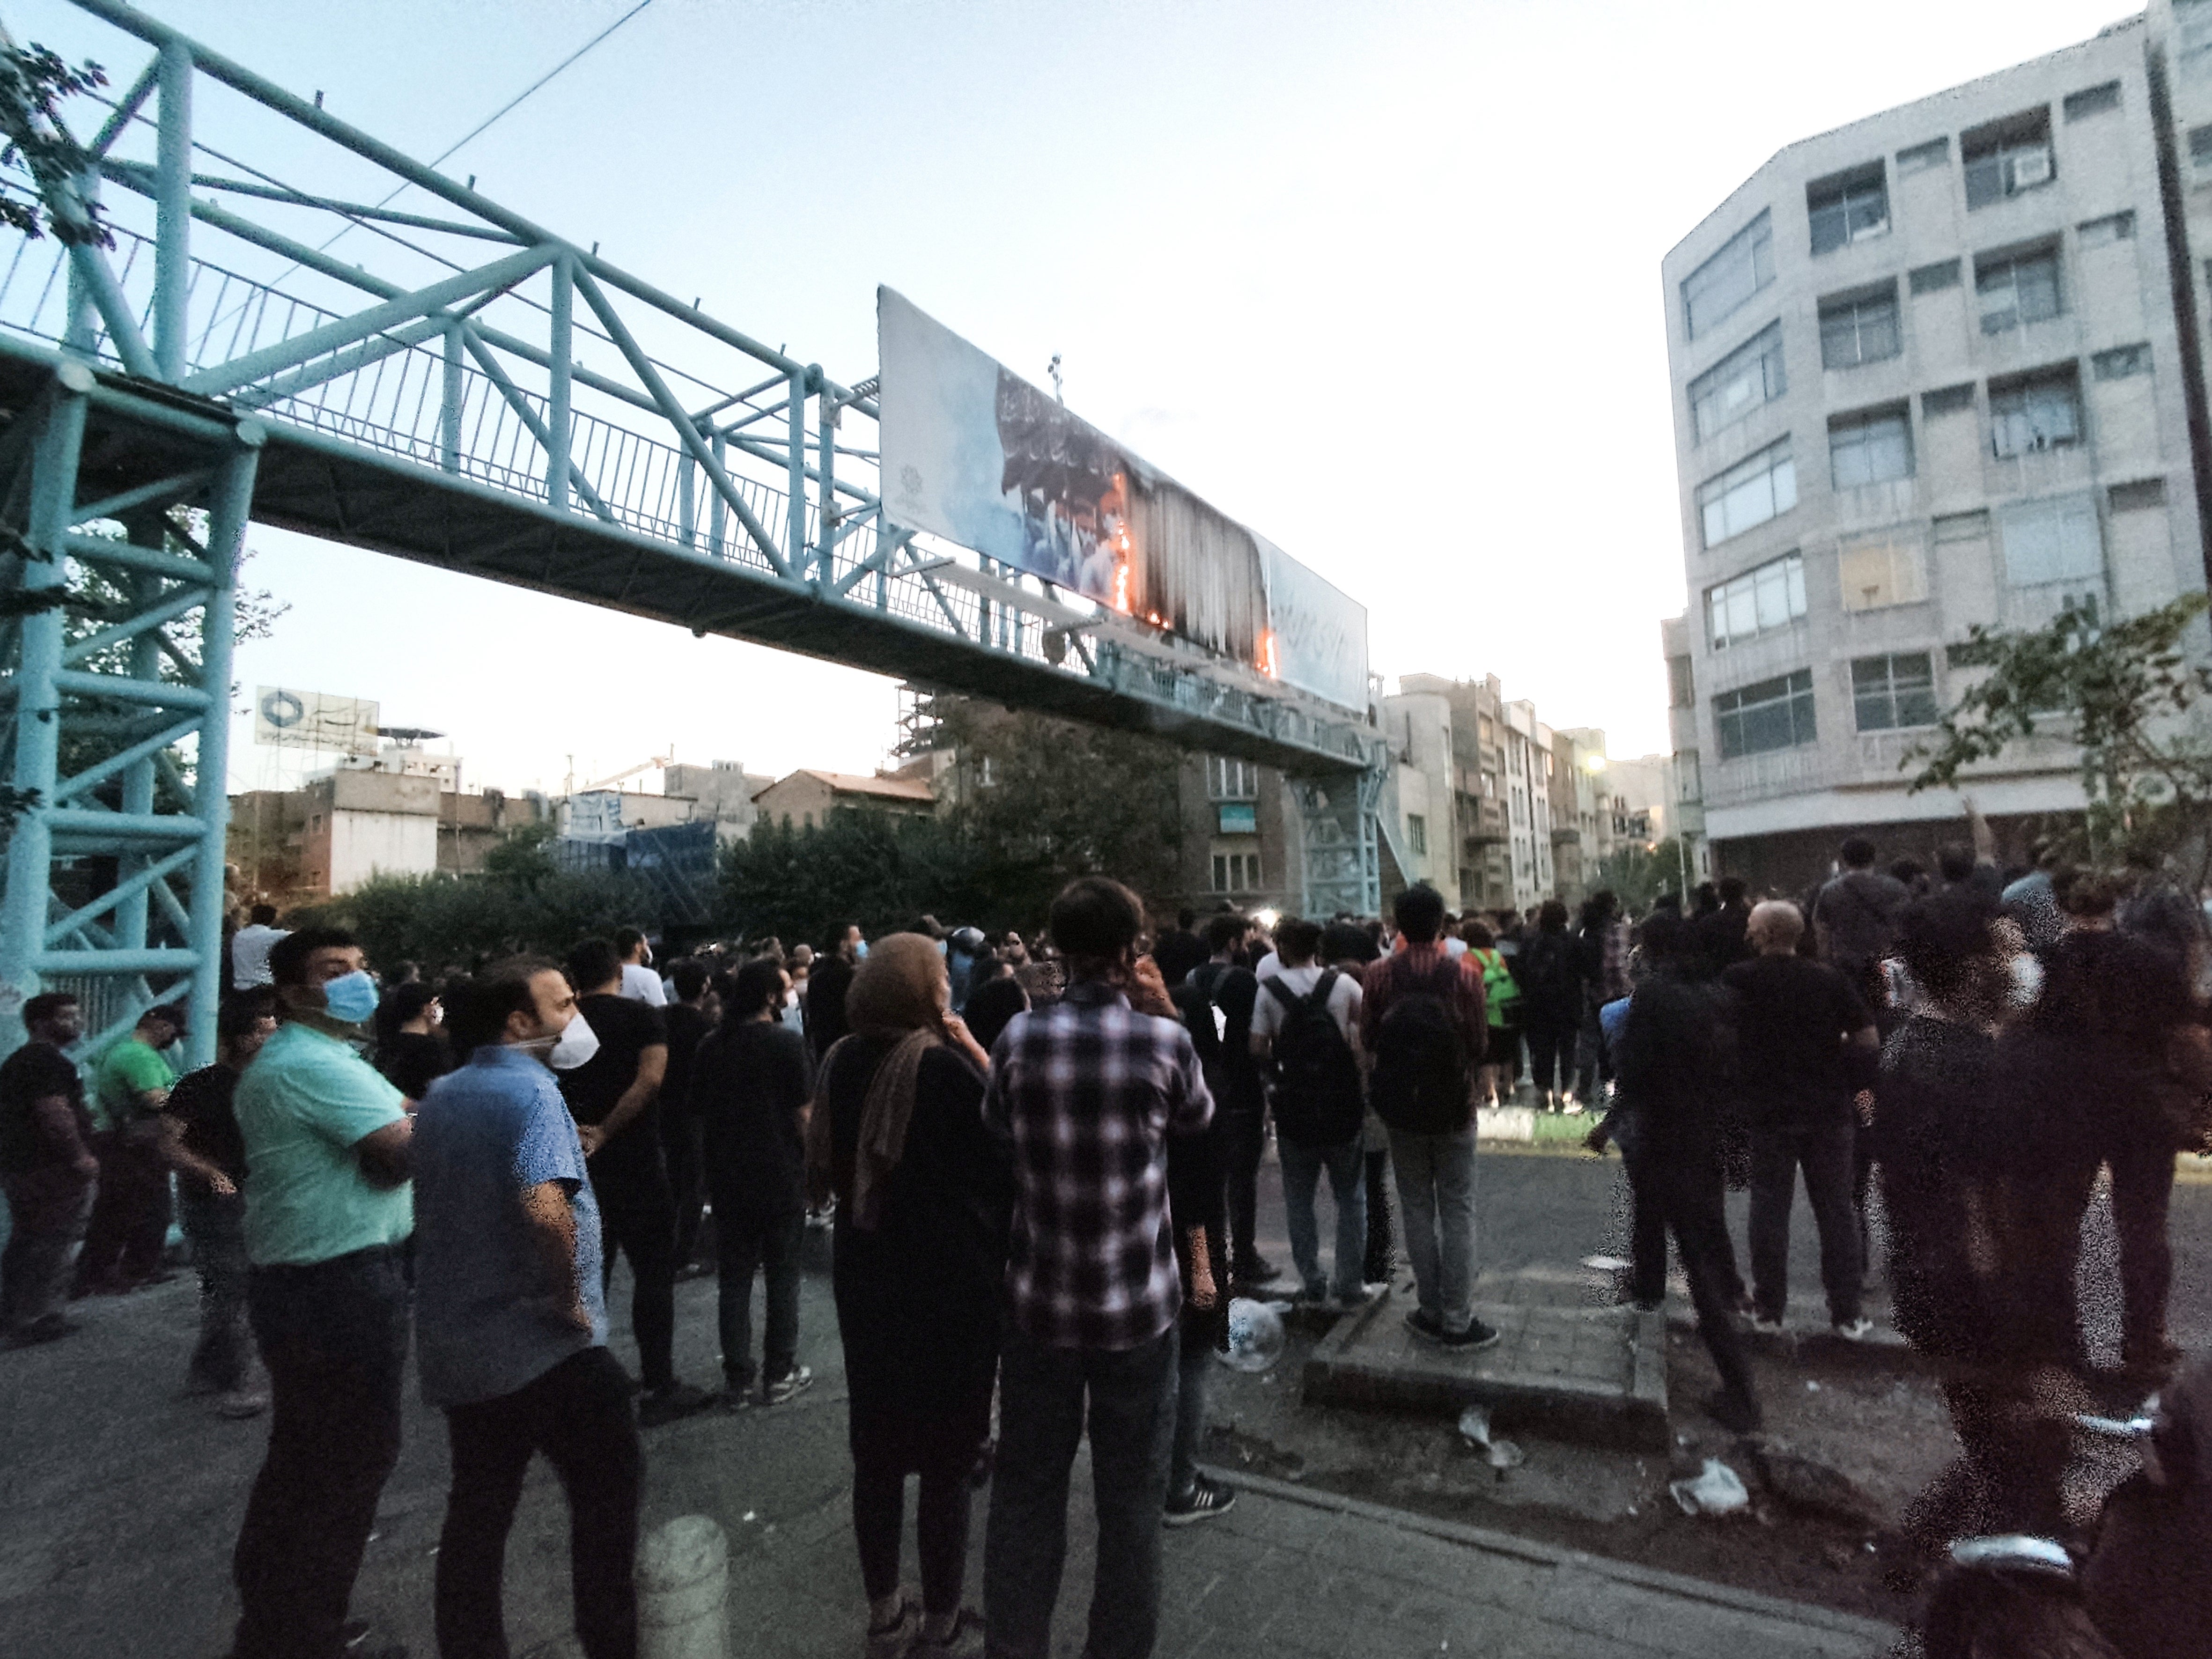 Dozens of people stage a demonstration to protest the death of a  22-year-old woman under custody in Tehran Iran on September 21, 2022. (Photo: Stringer/Anadolu Agency, Getty Images)